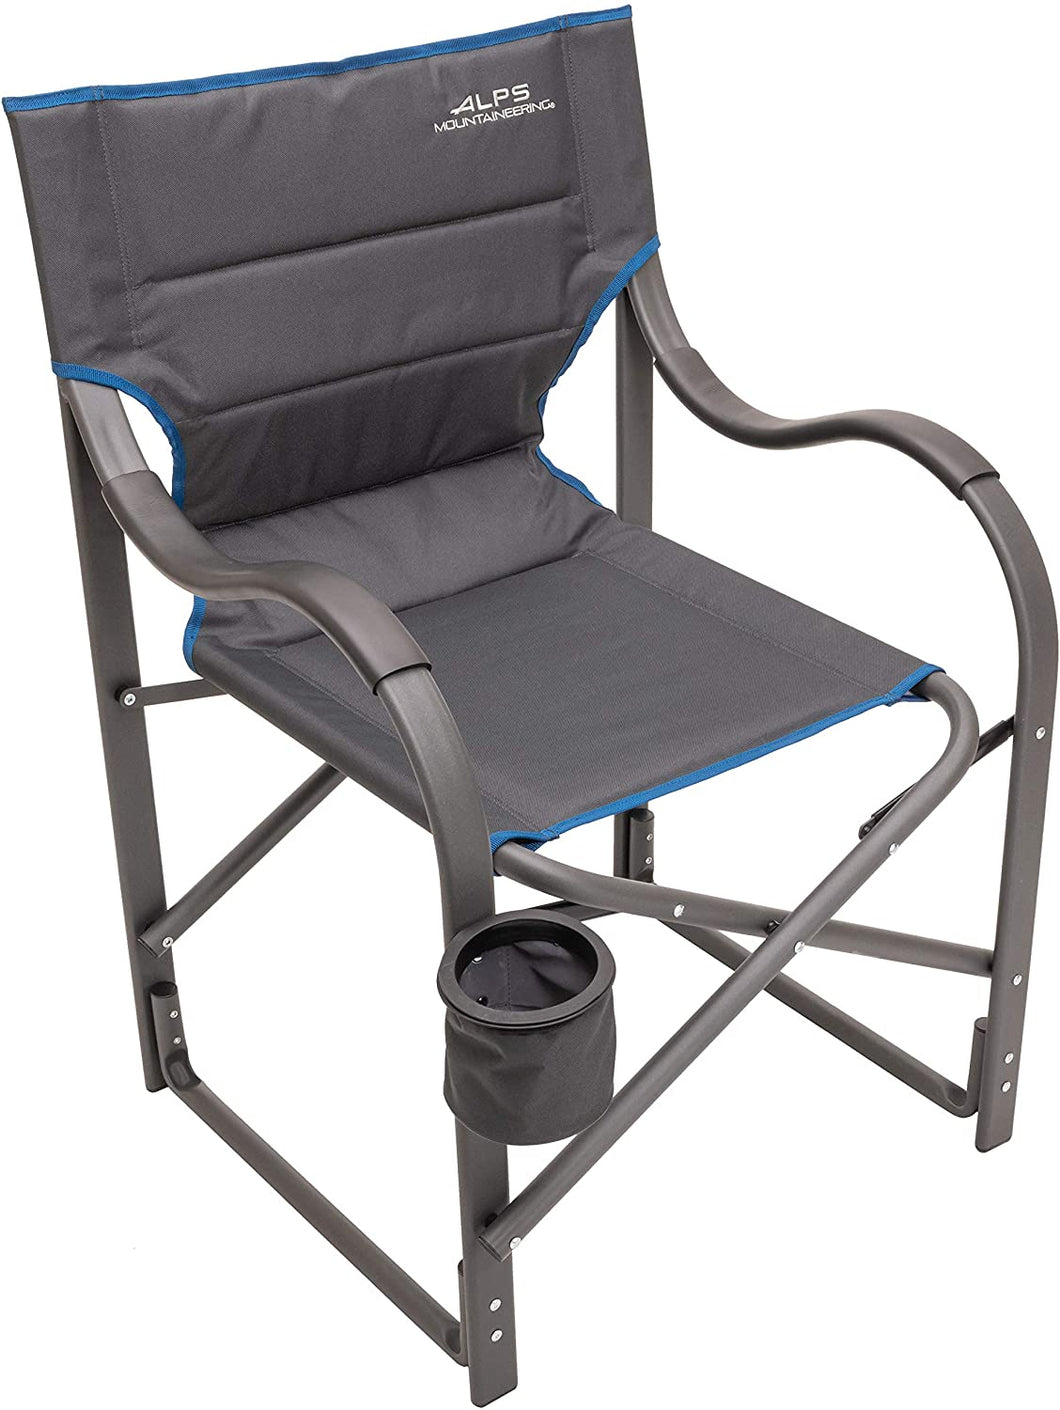 ALPS Mountaineering Camp Chair, Charcoal/Blue - AL8111118